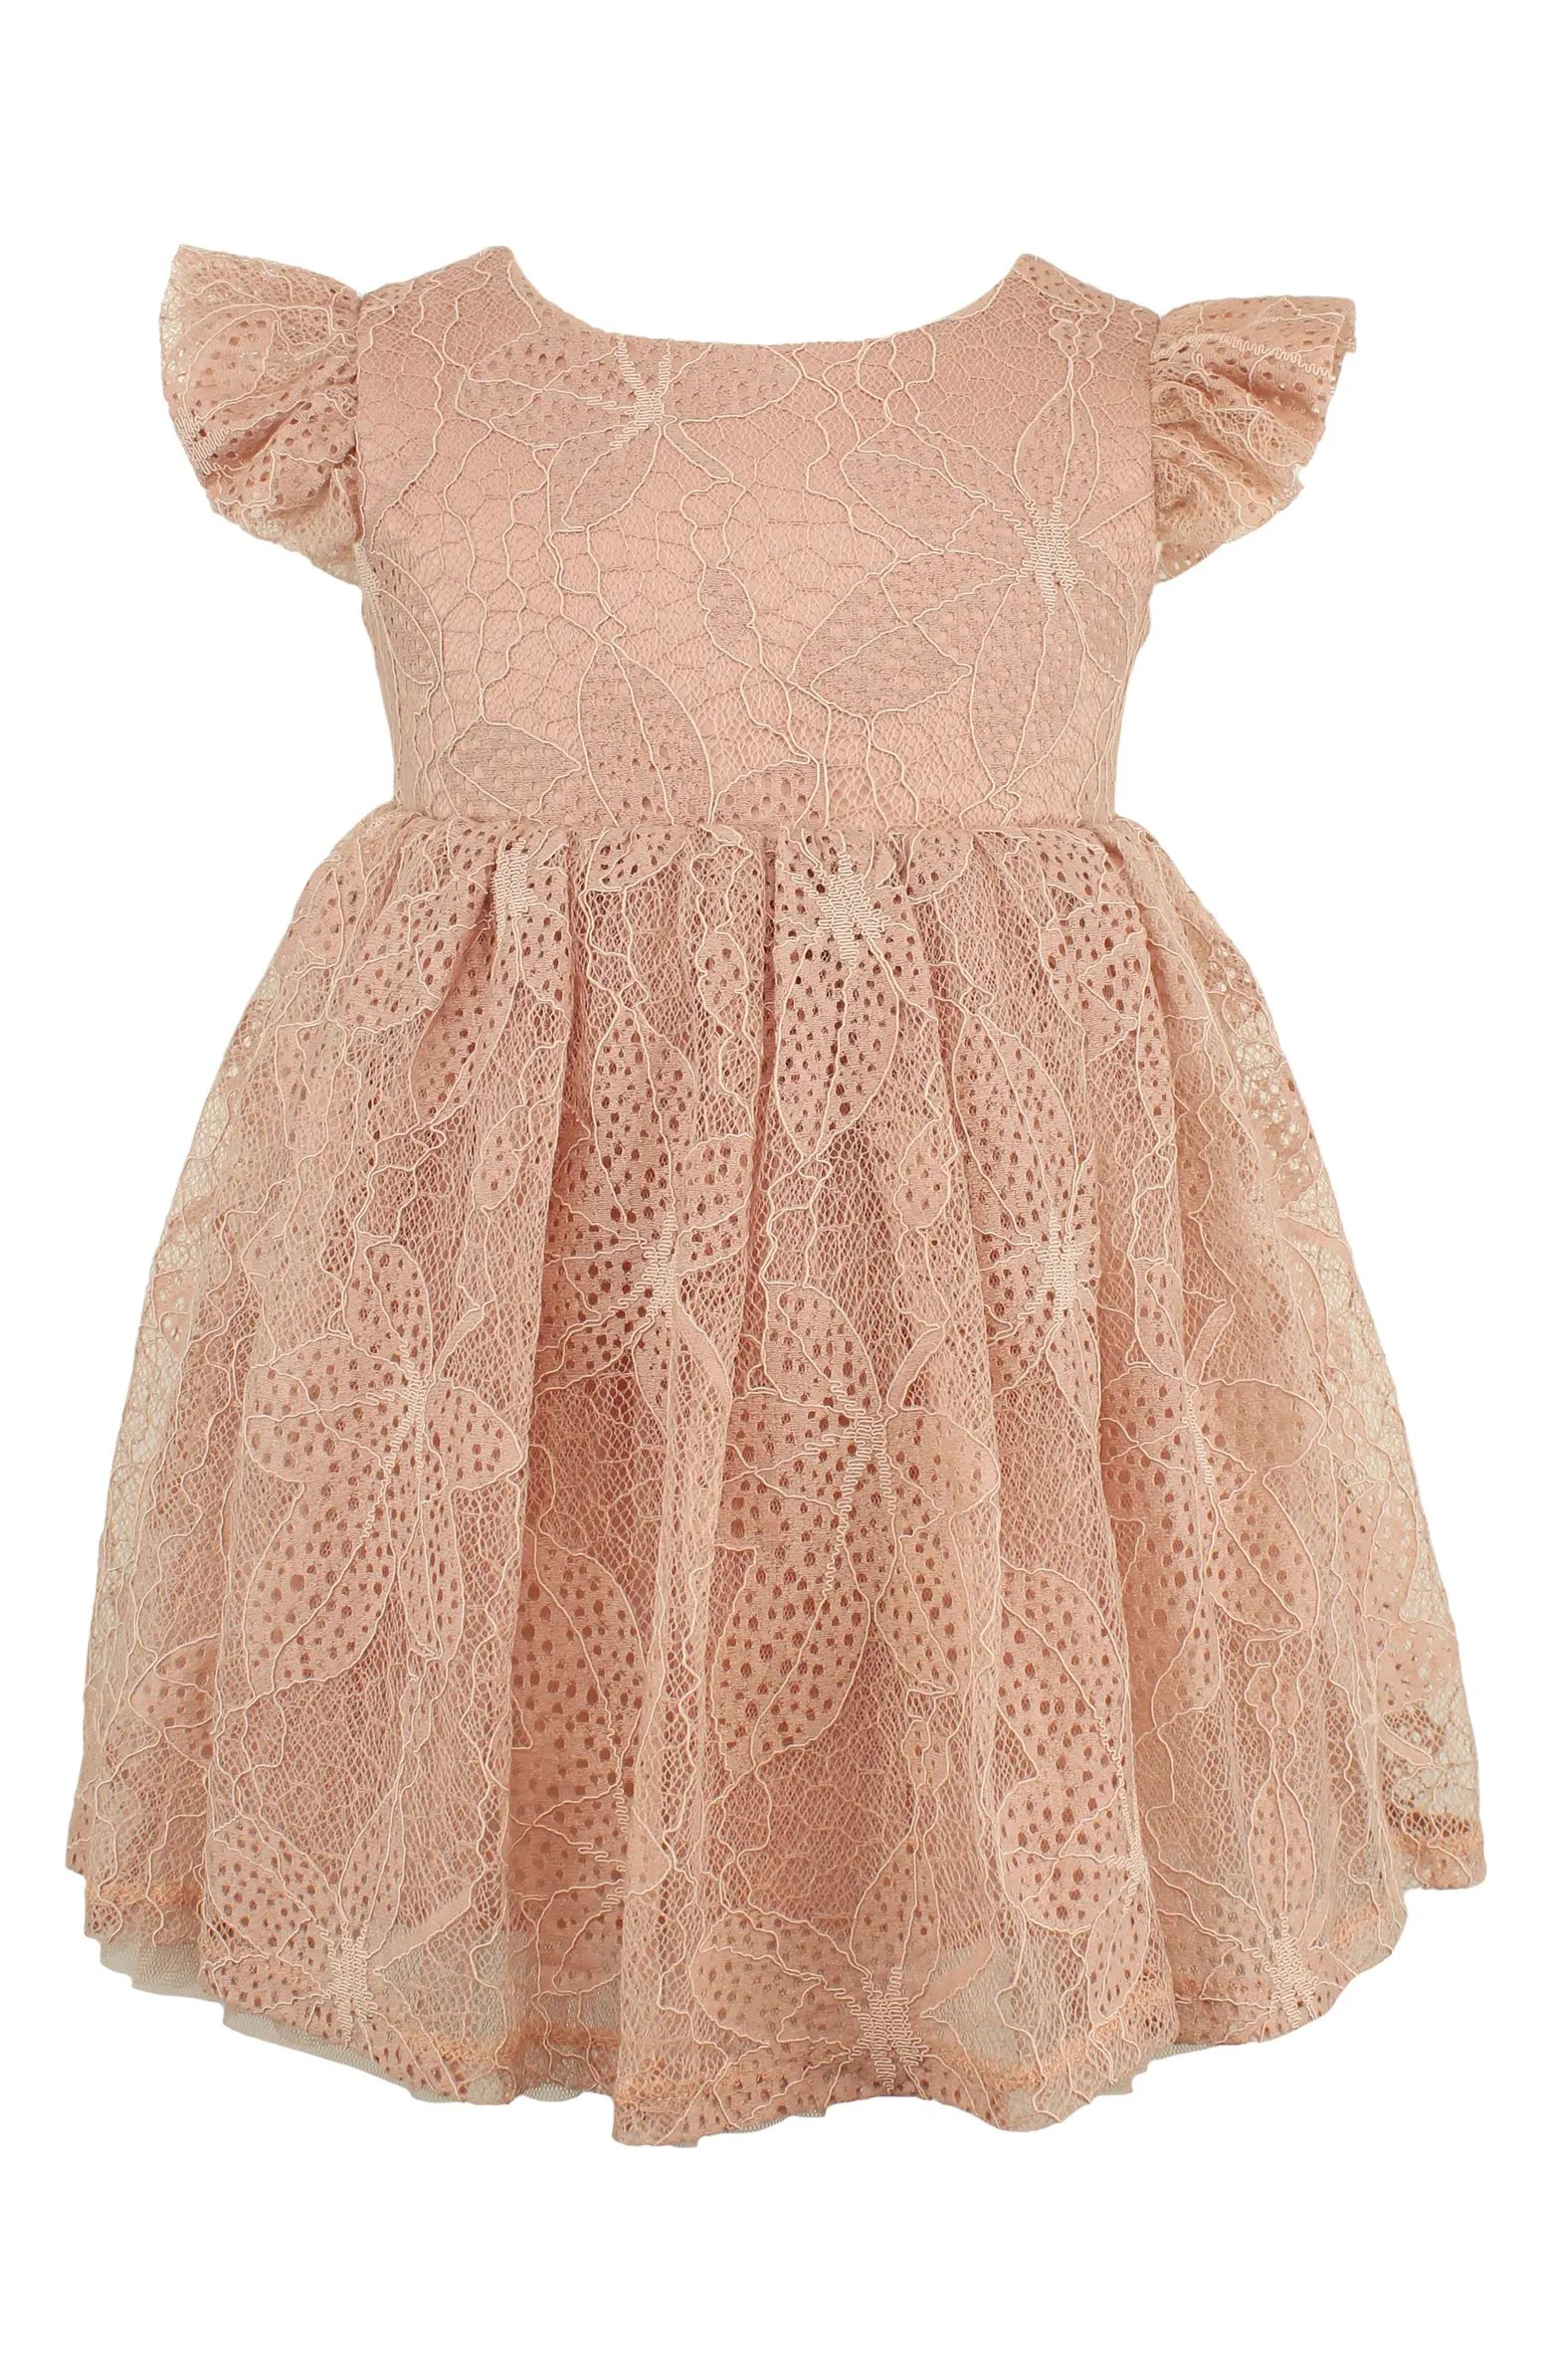 Lace Overlay Dress | Nordstrom